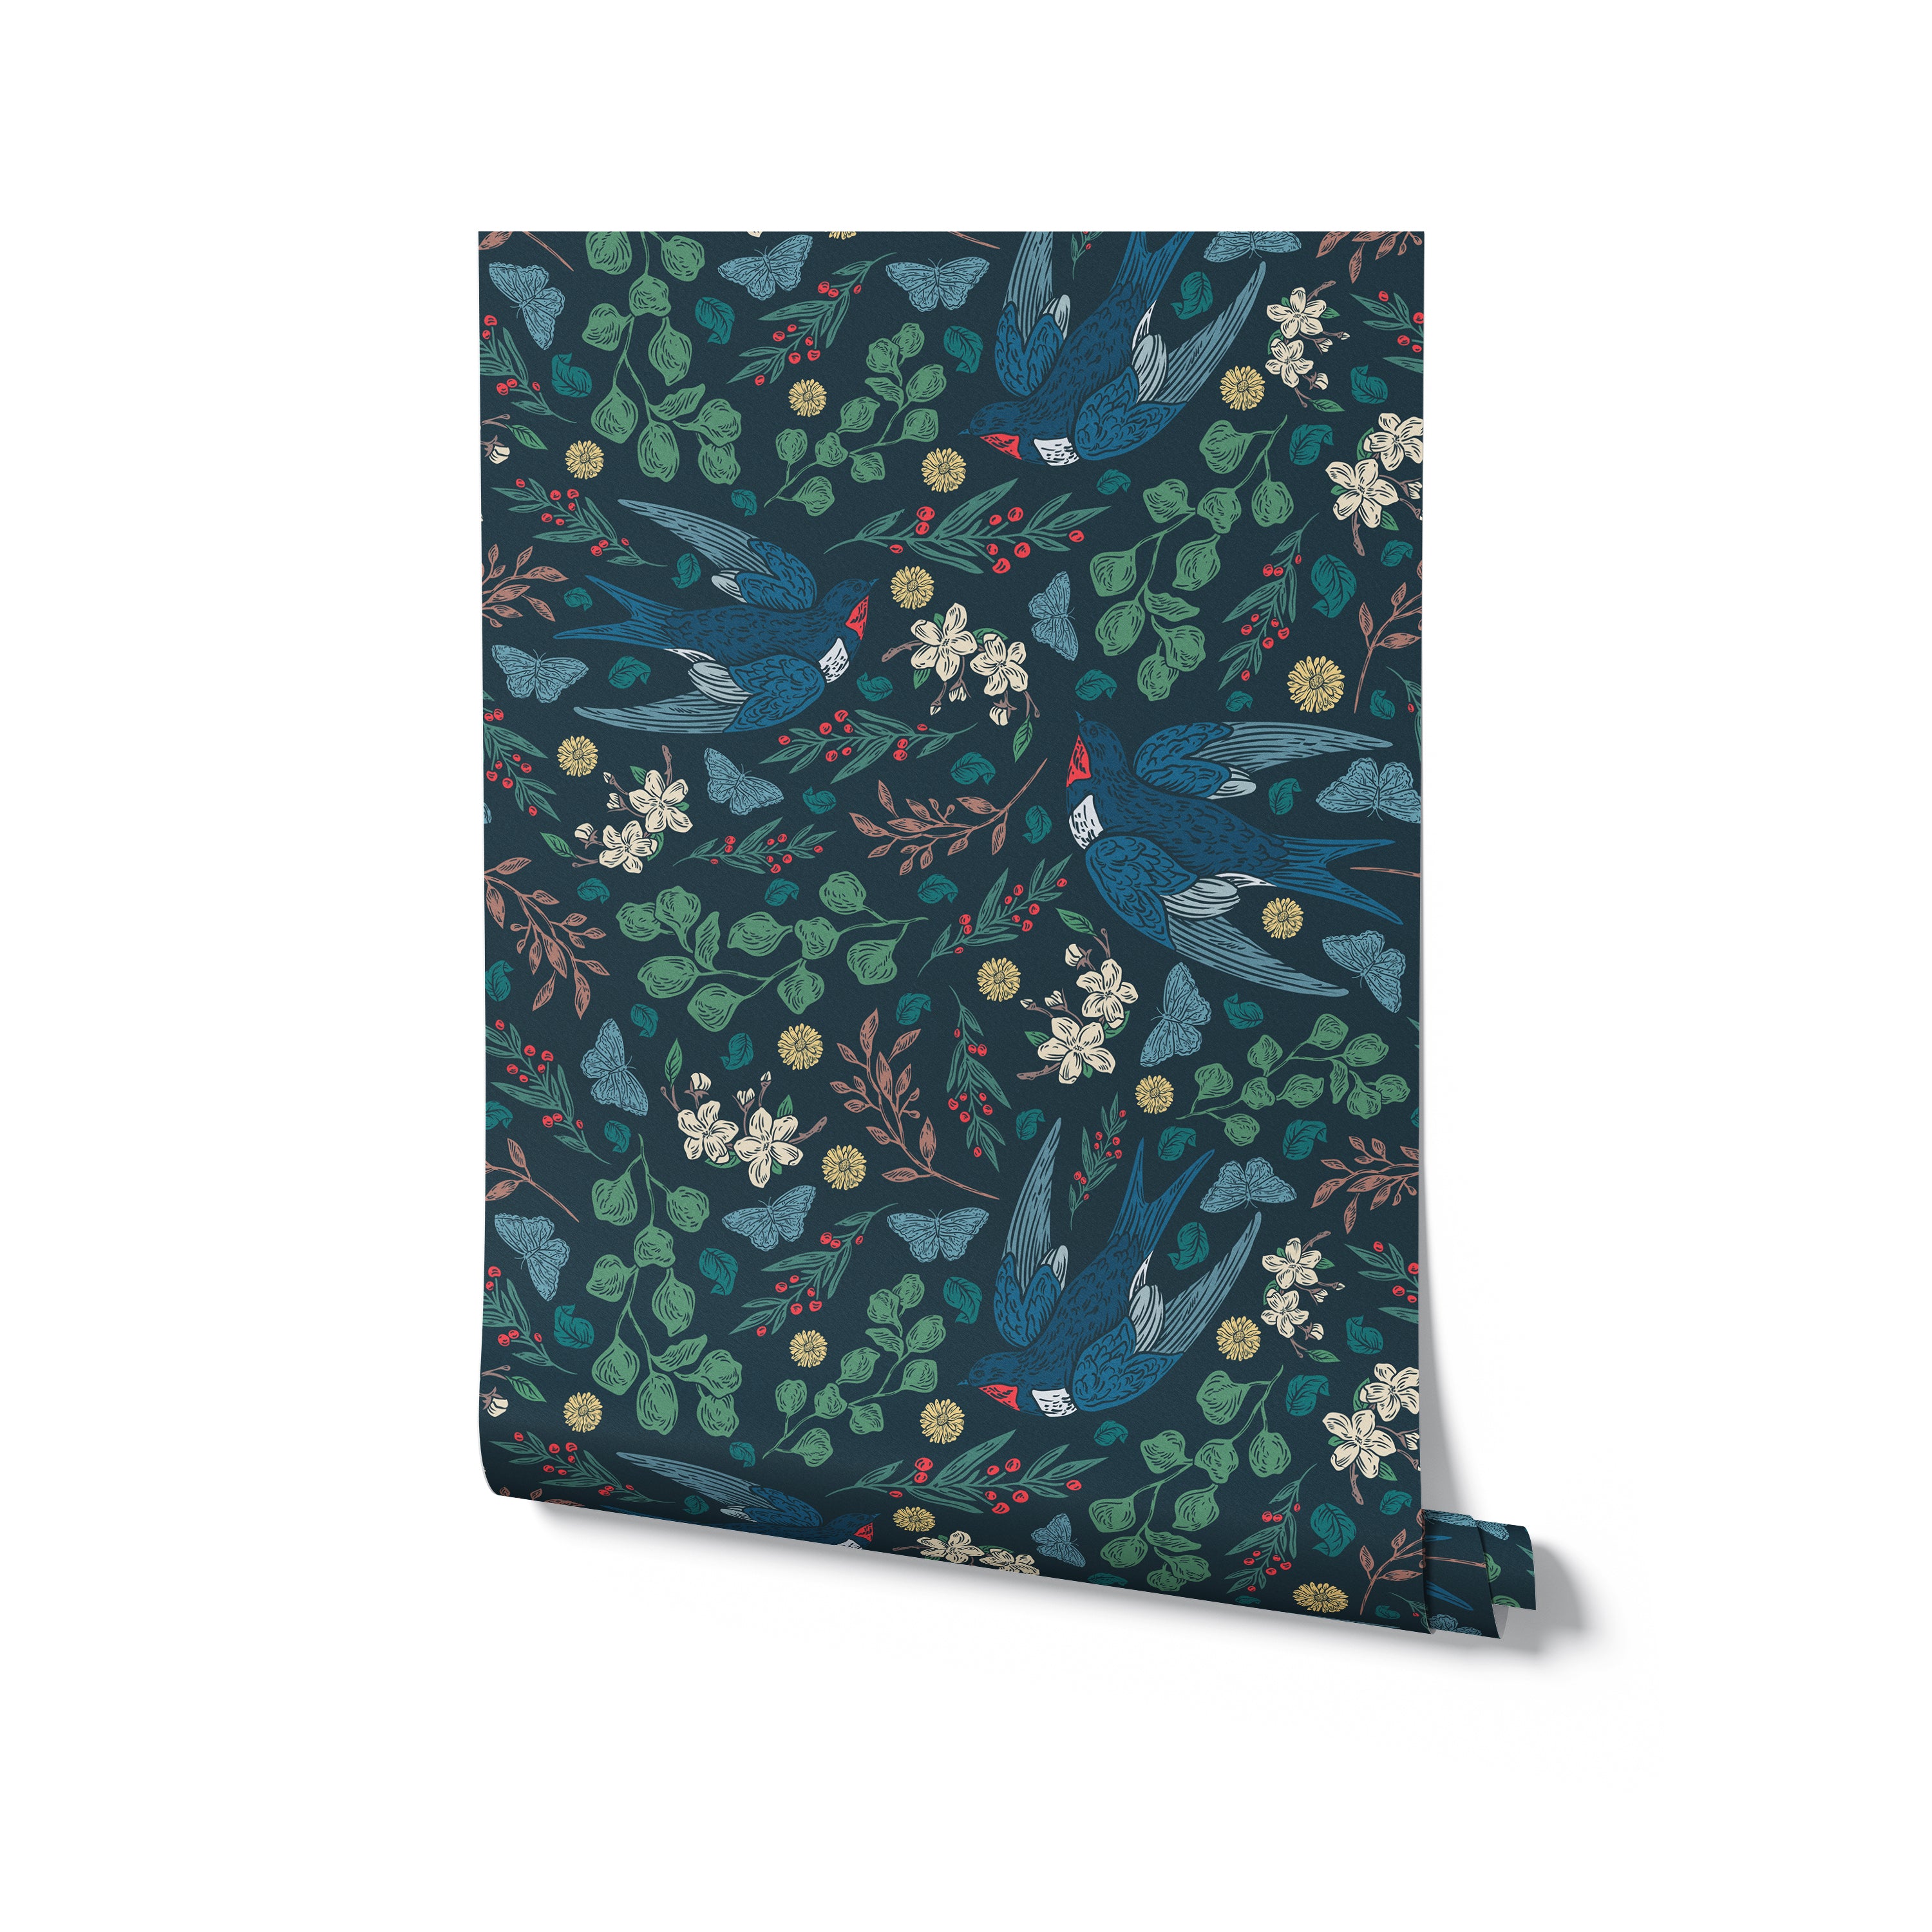 Rolled wallpaper showcasing the Vintage Swift design with detailed illustrations of blue swift birds, green leaves, and scattered floral elements on a dark teal background, offering a classic look with a touch of nature's beauty.